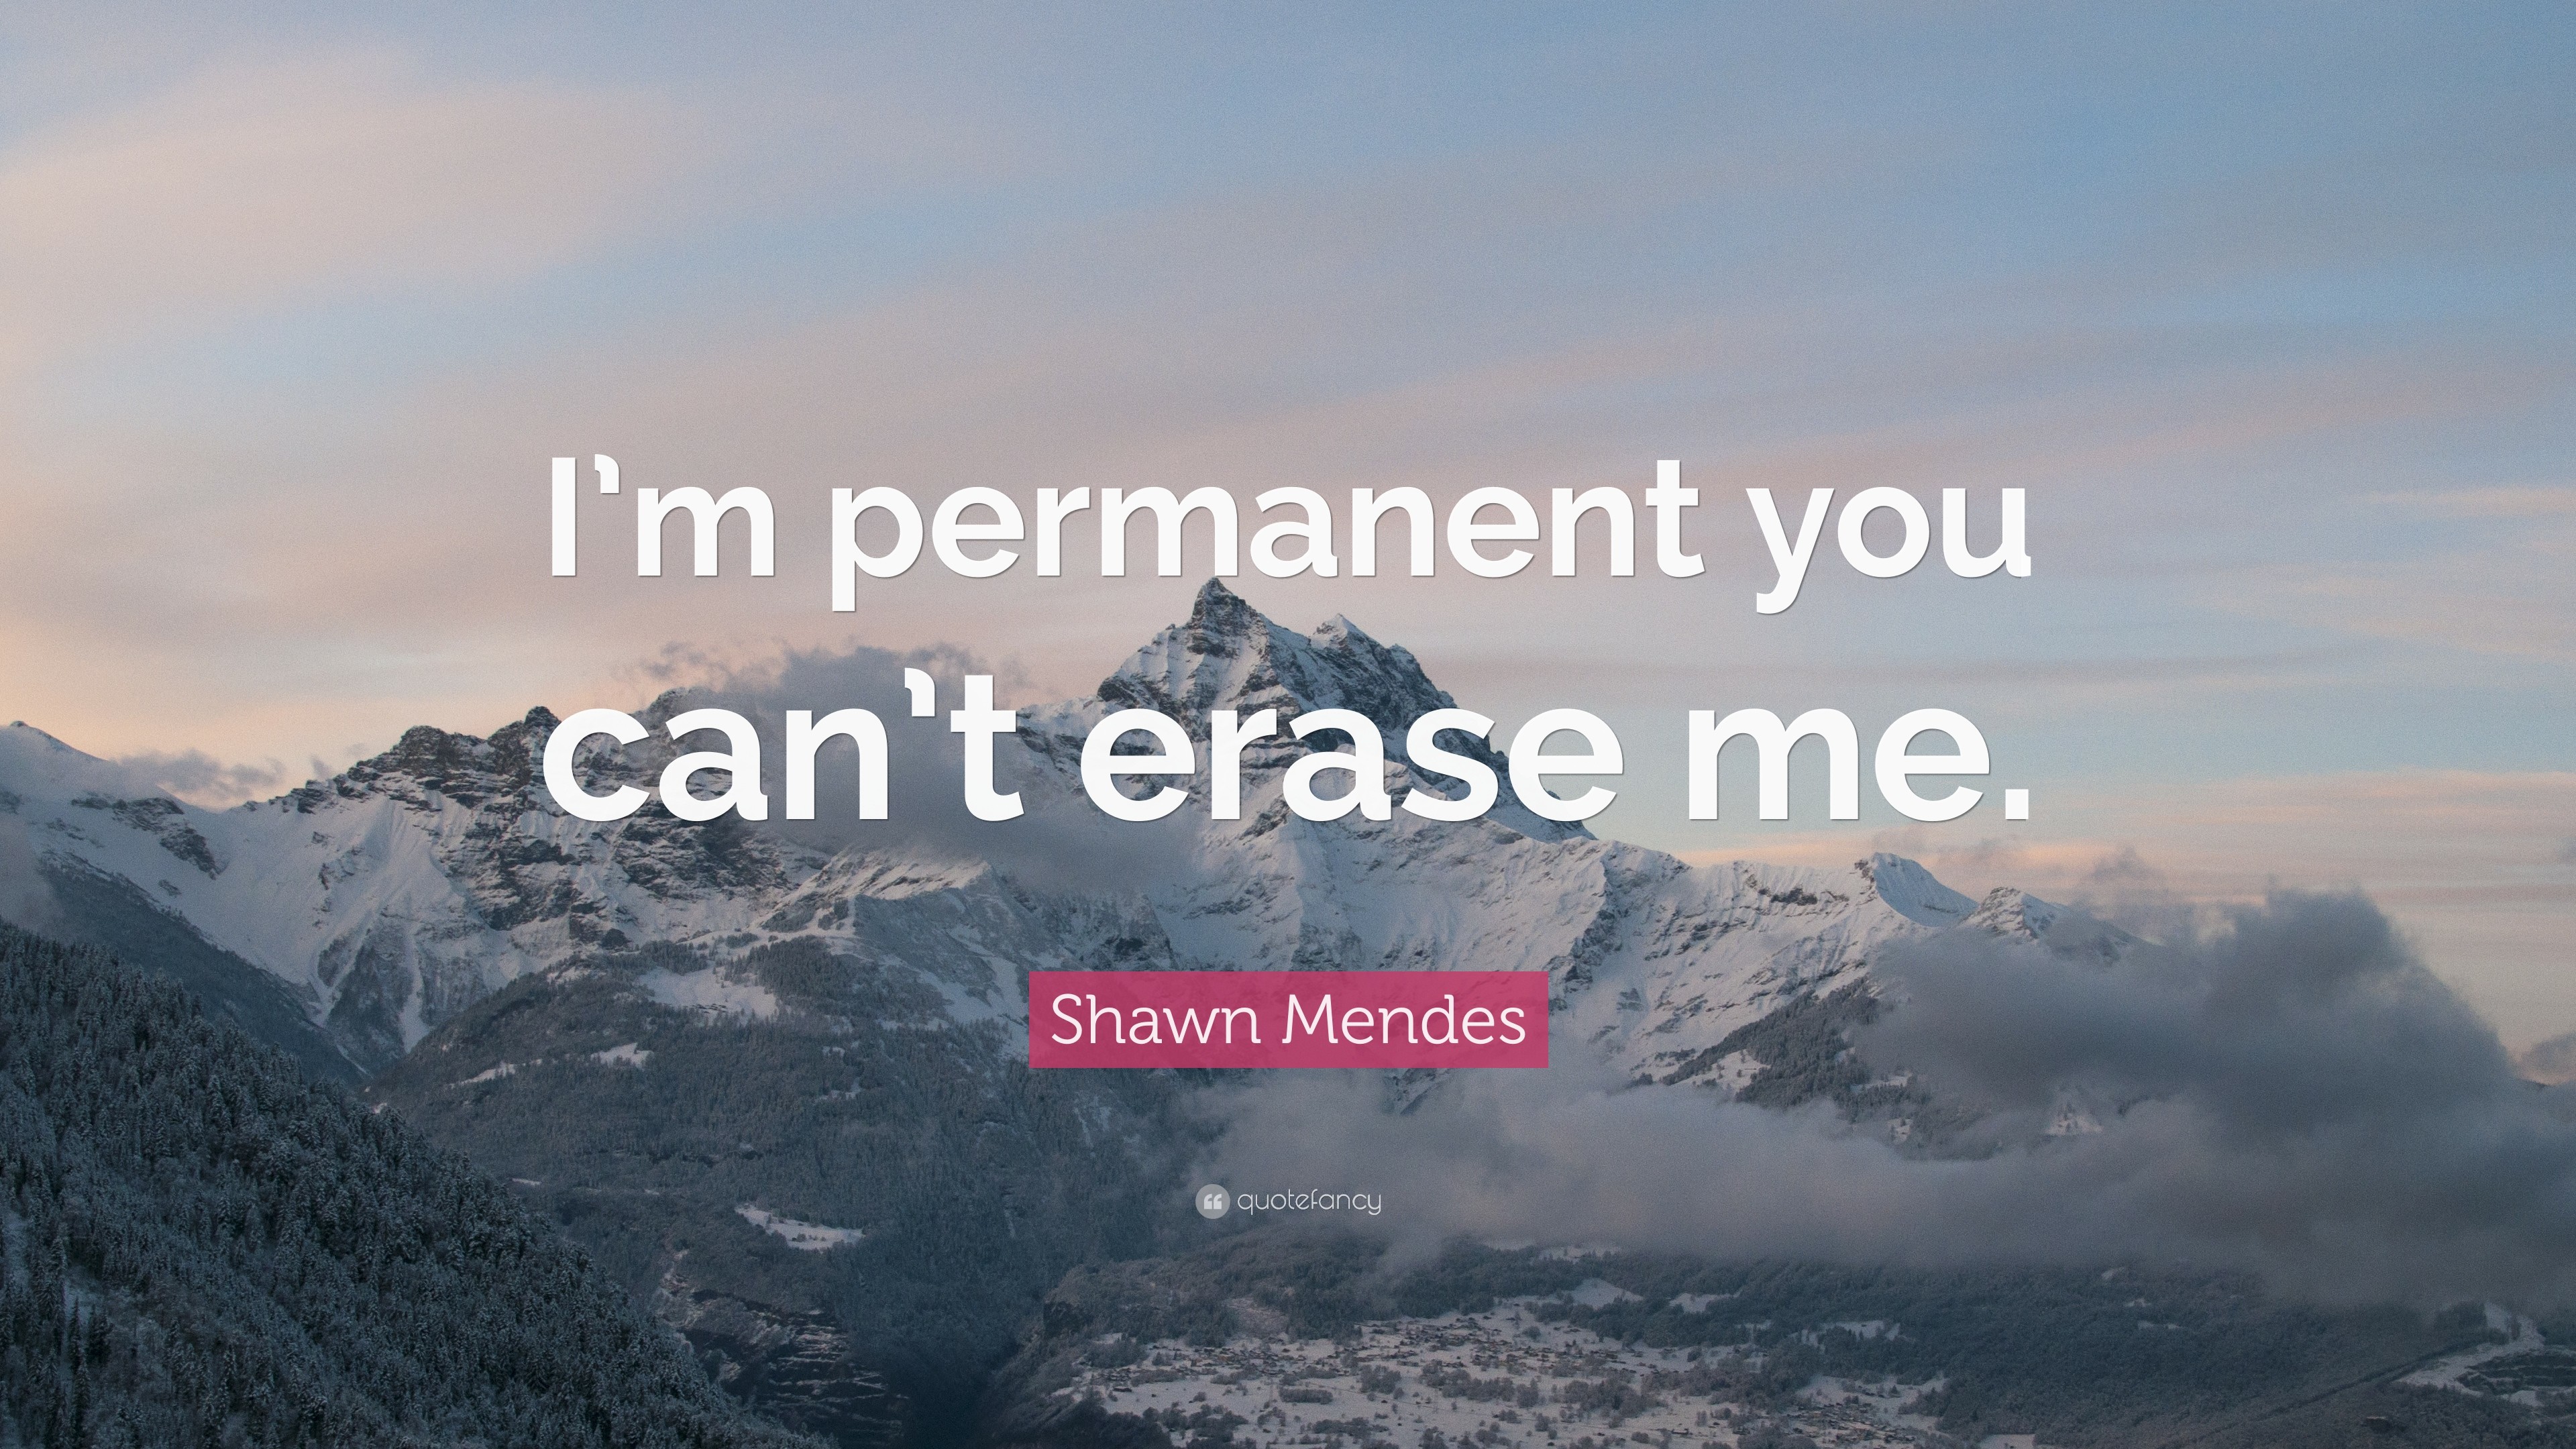 3840x2160 Shawn Mendes Quote: “I'm permanent you can't erase me.